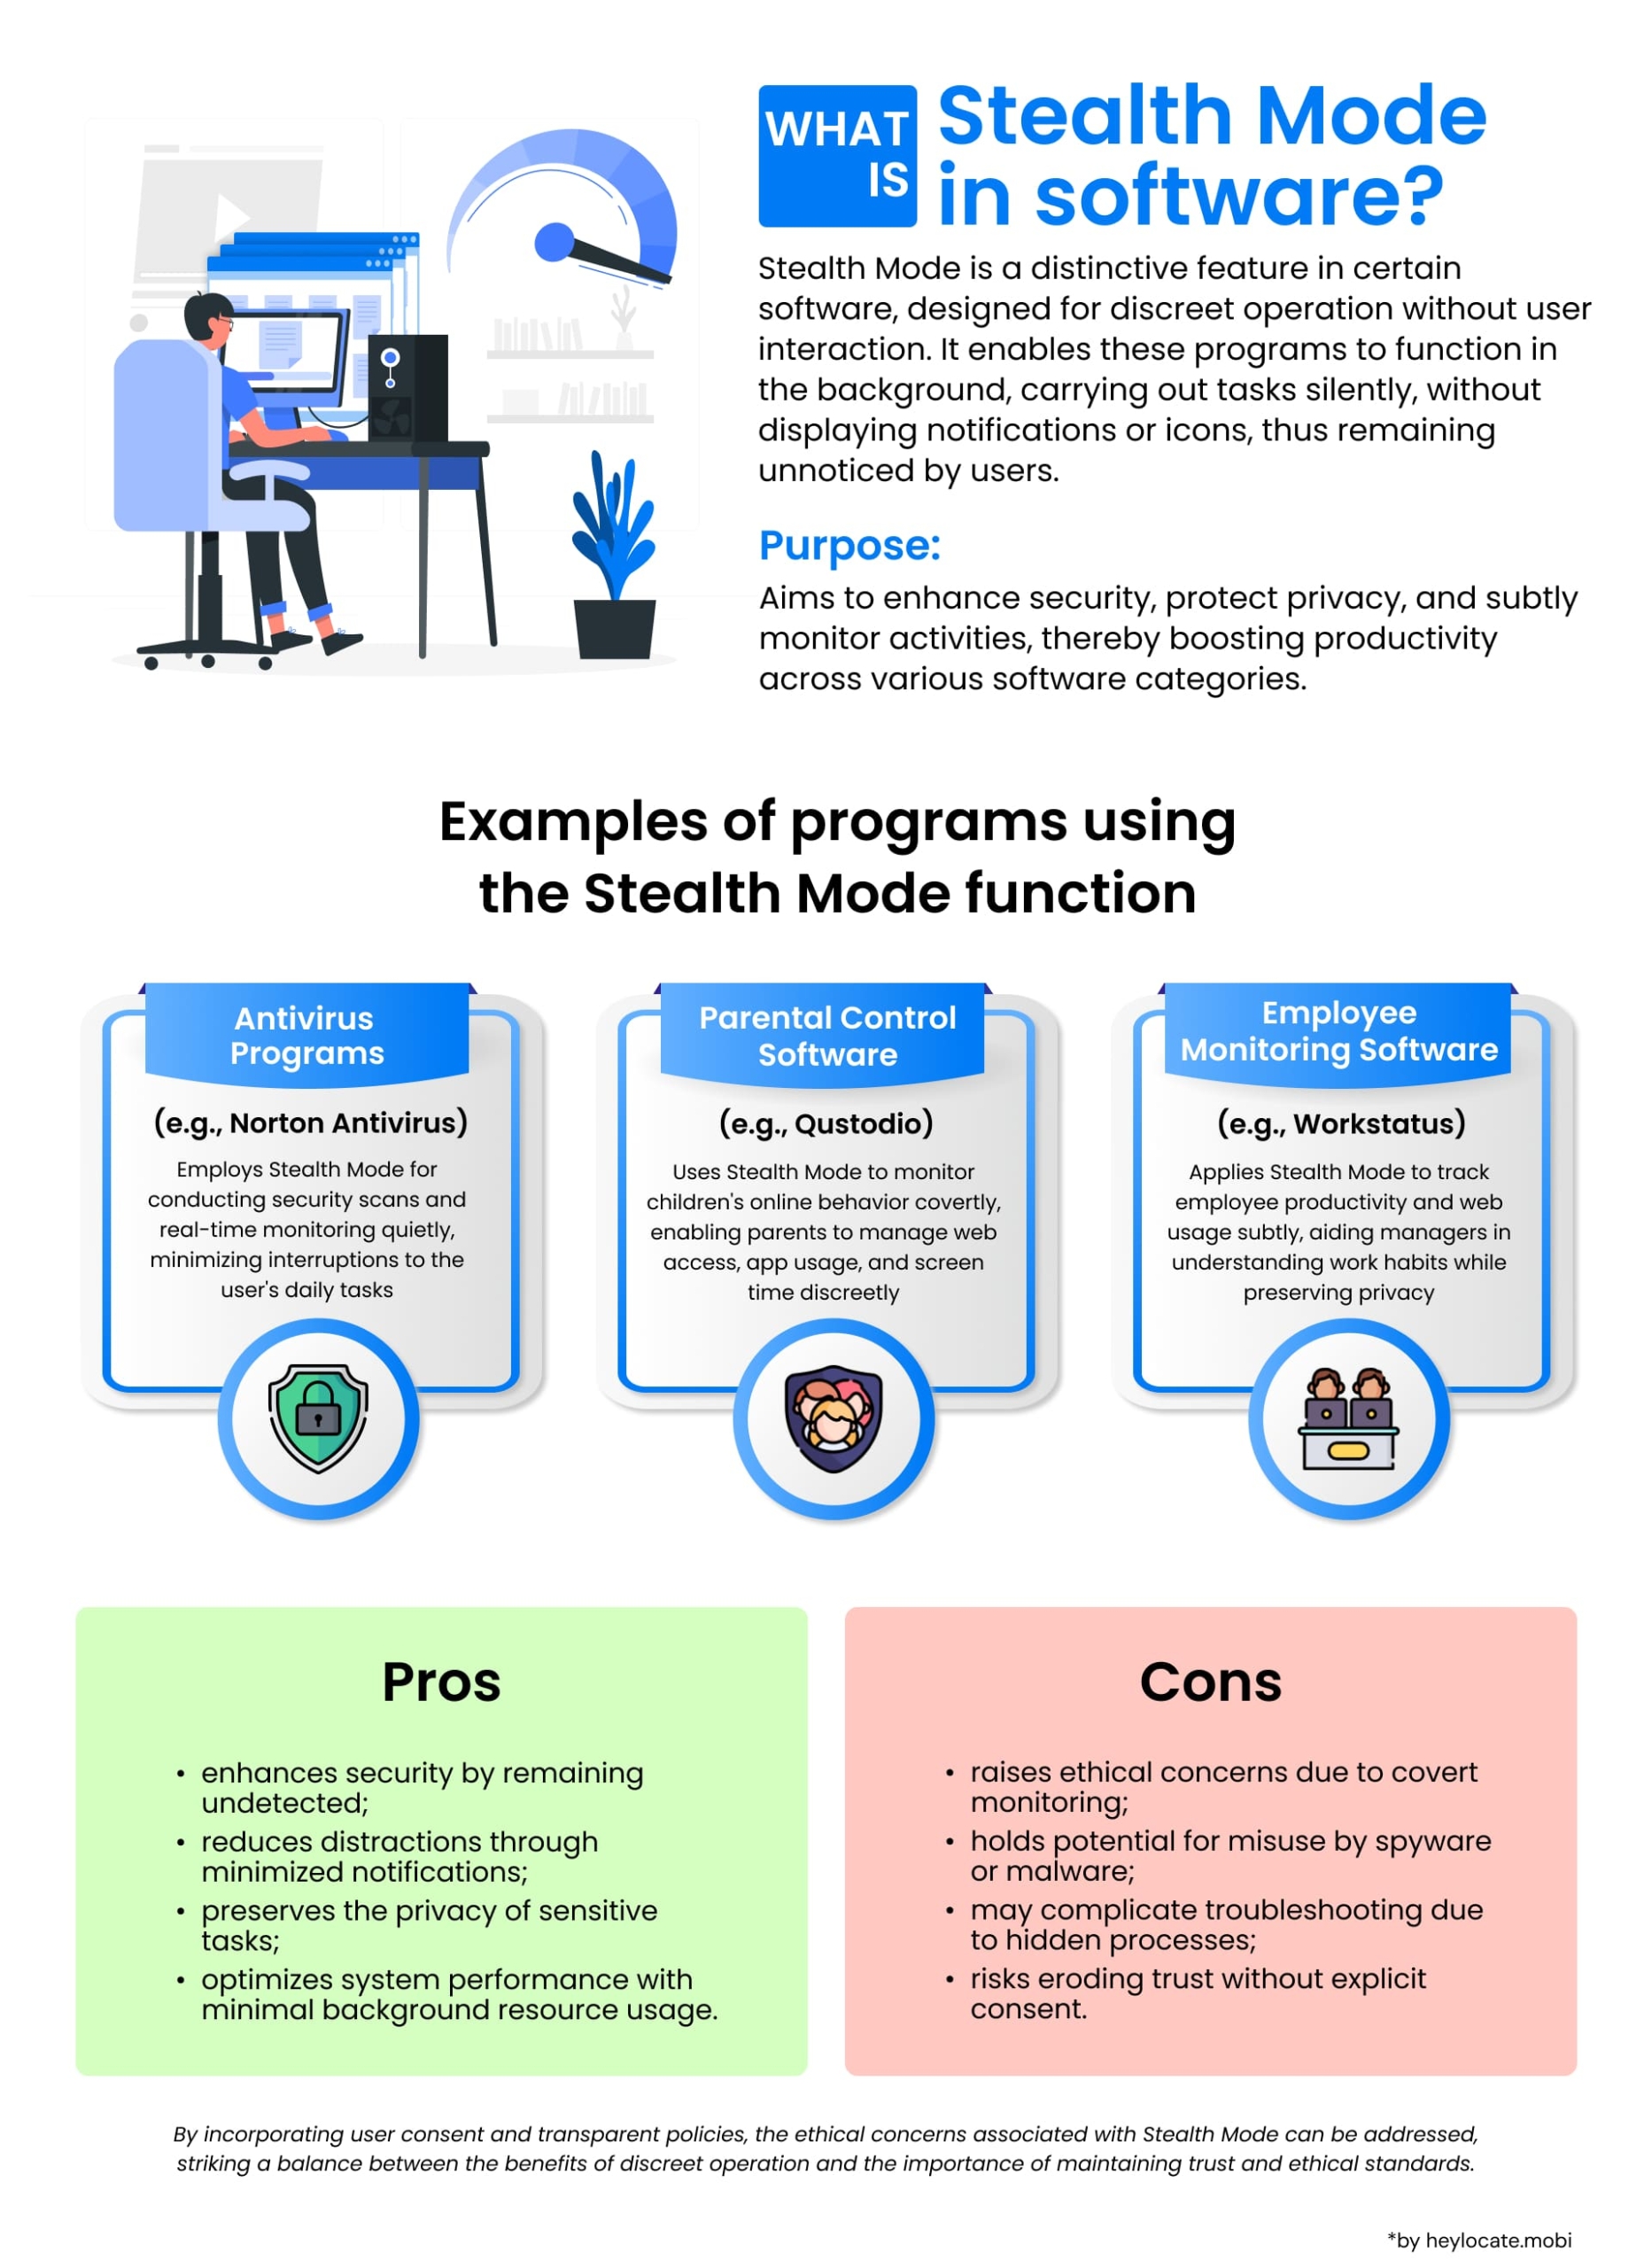 An informative illustration detailing what Stealth Mode is in software applications, with examples of usage in antivirus, parental controls, and employee monitoring, alongside advantages and potential drawbacks